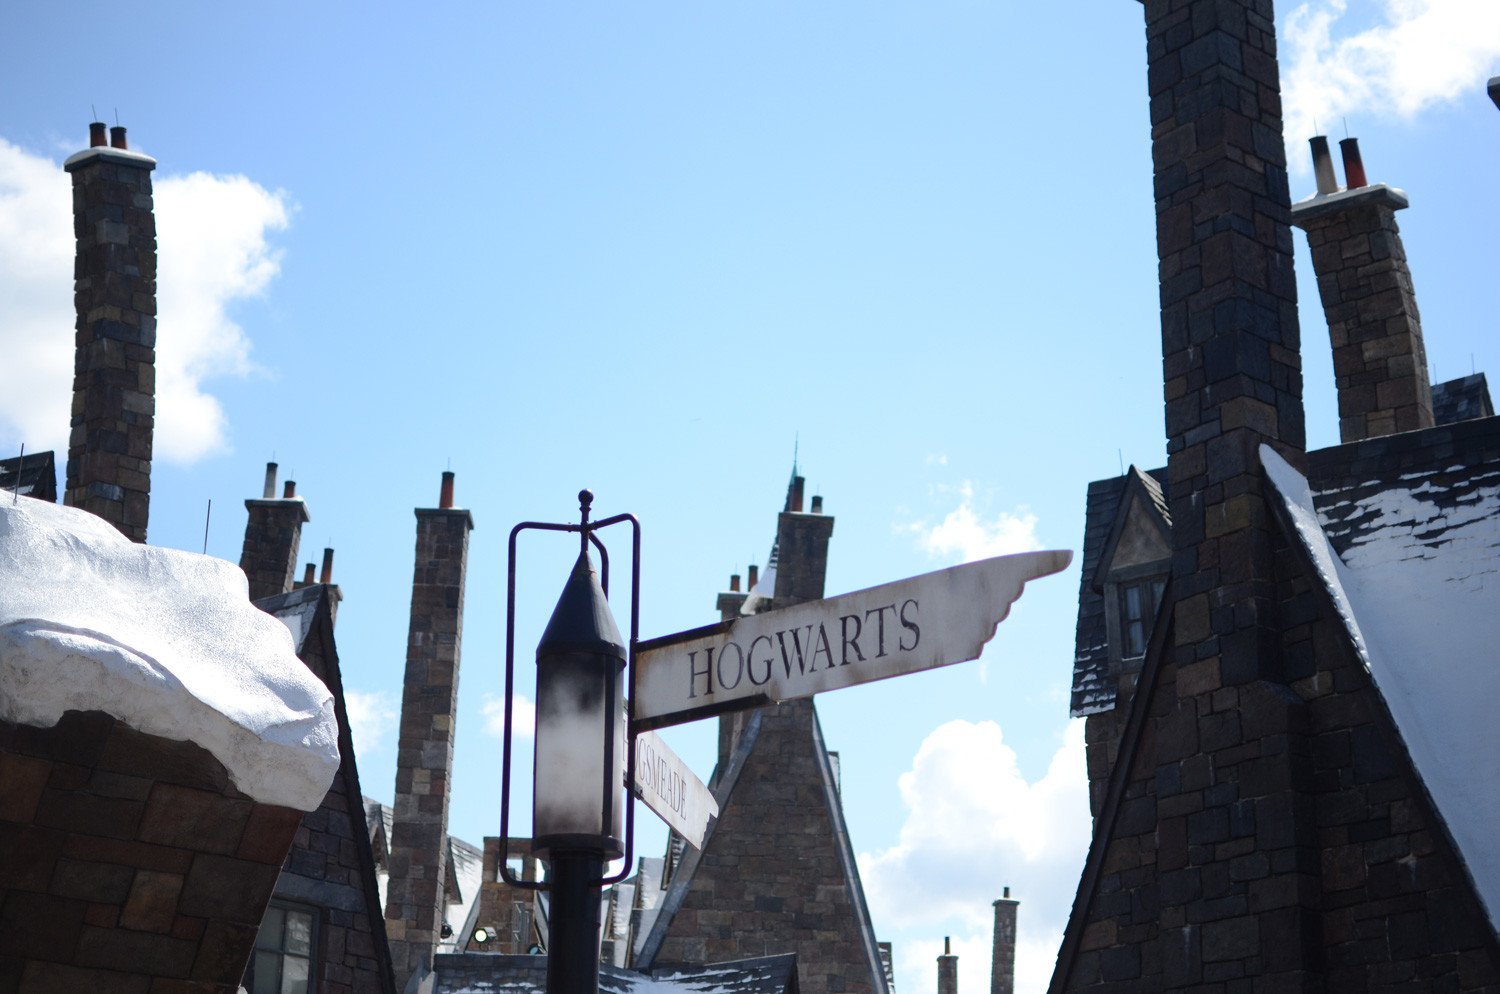 Hogwarts sign at The Wizarding World of Harry Potter at Universal Studios, Florida